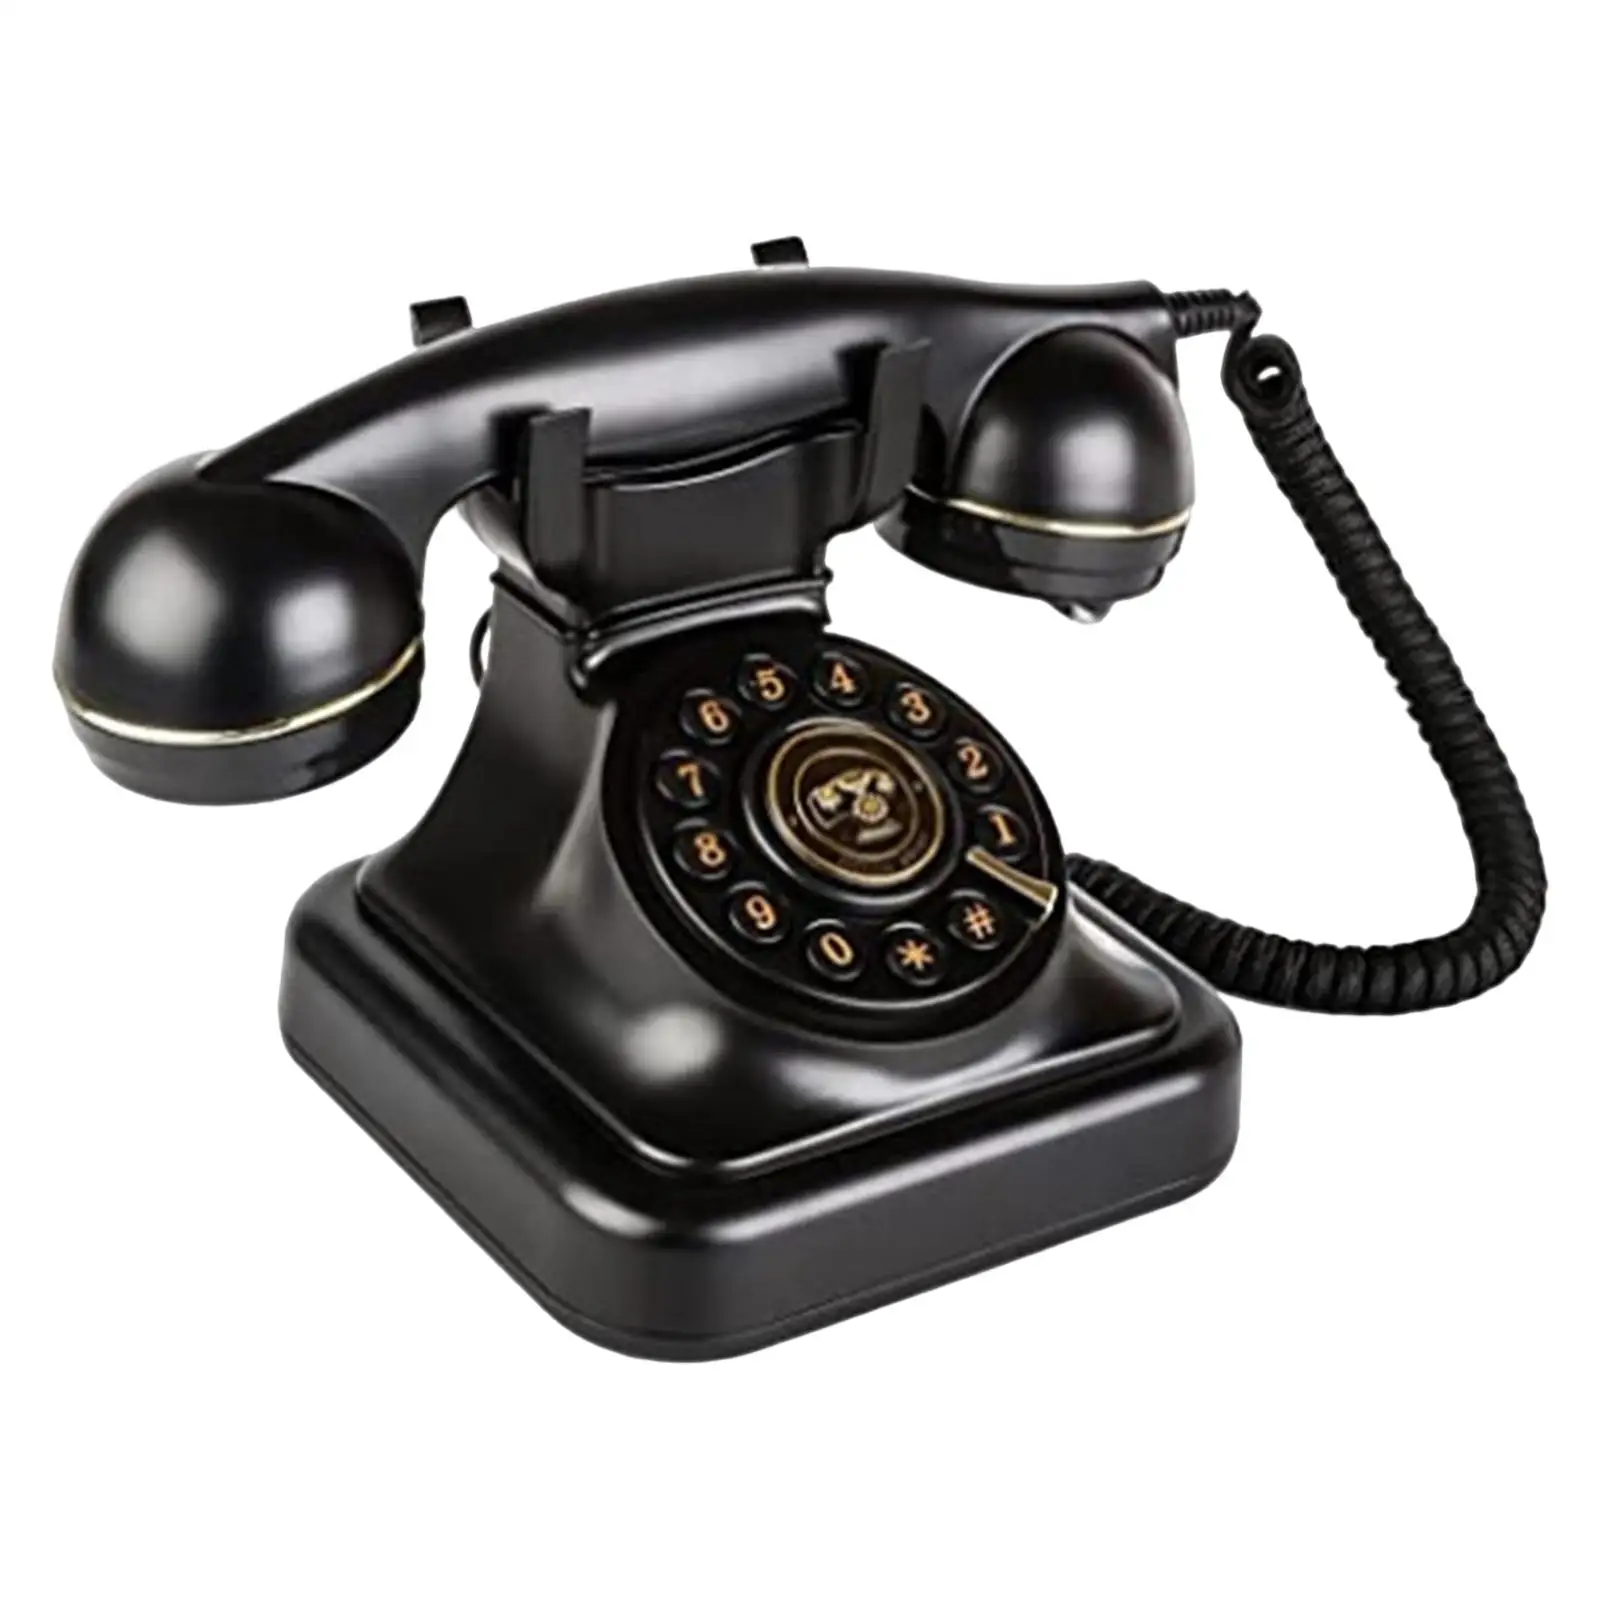 Retro Style Corded Phone Old Fashion Landline Phones Wire Landline Classic with Mechanical Bell Push Button Dial for Decor